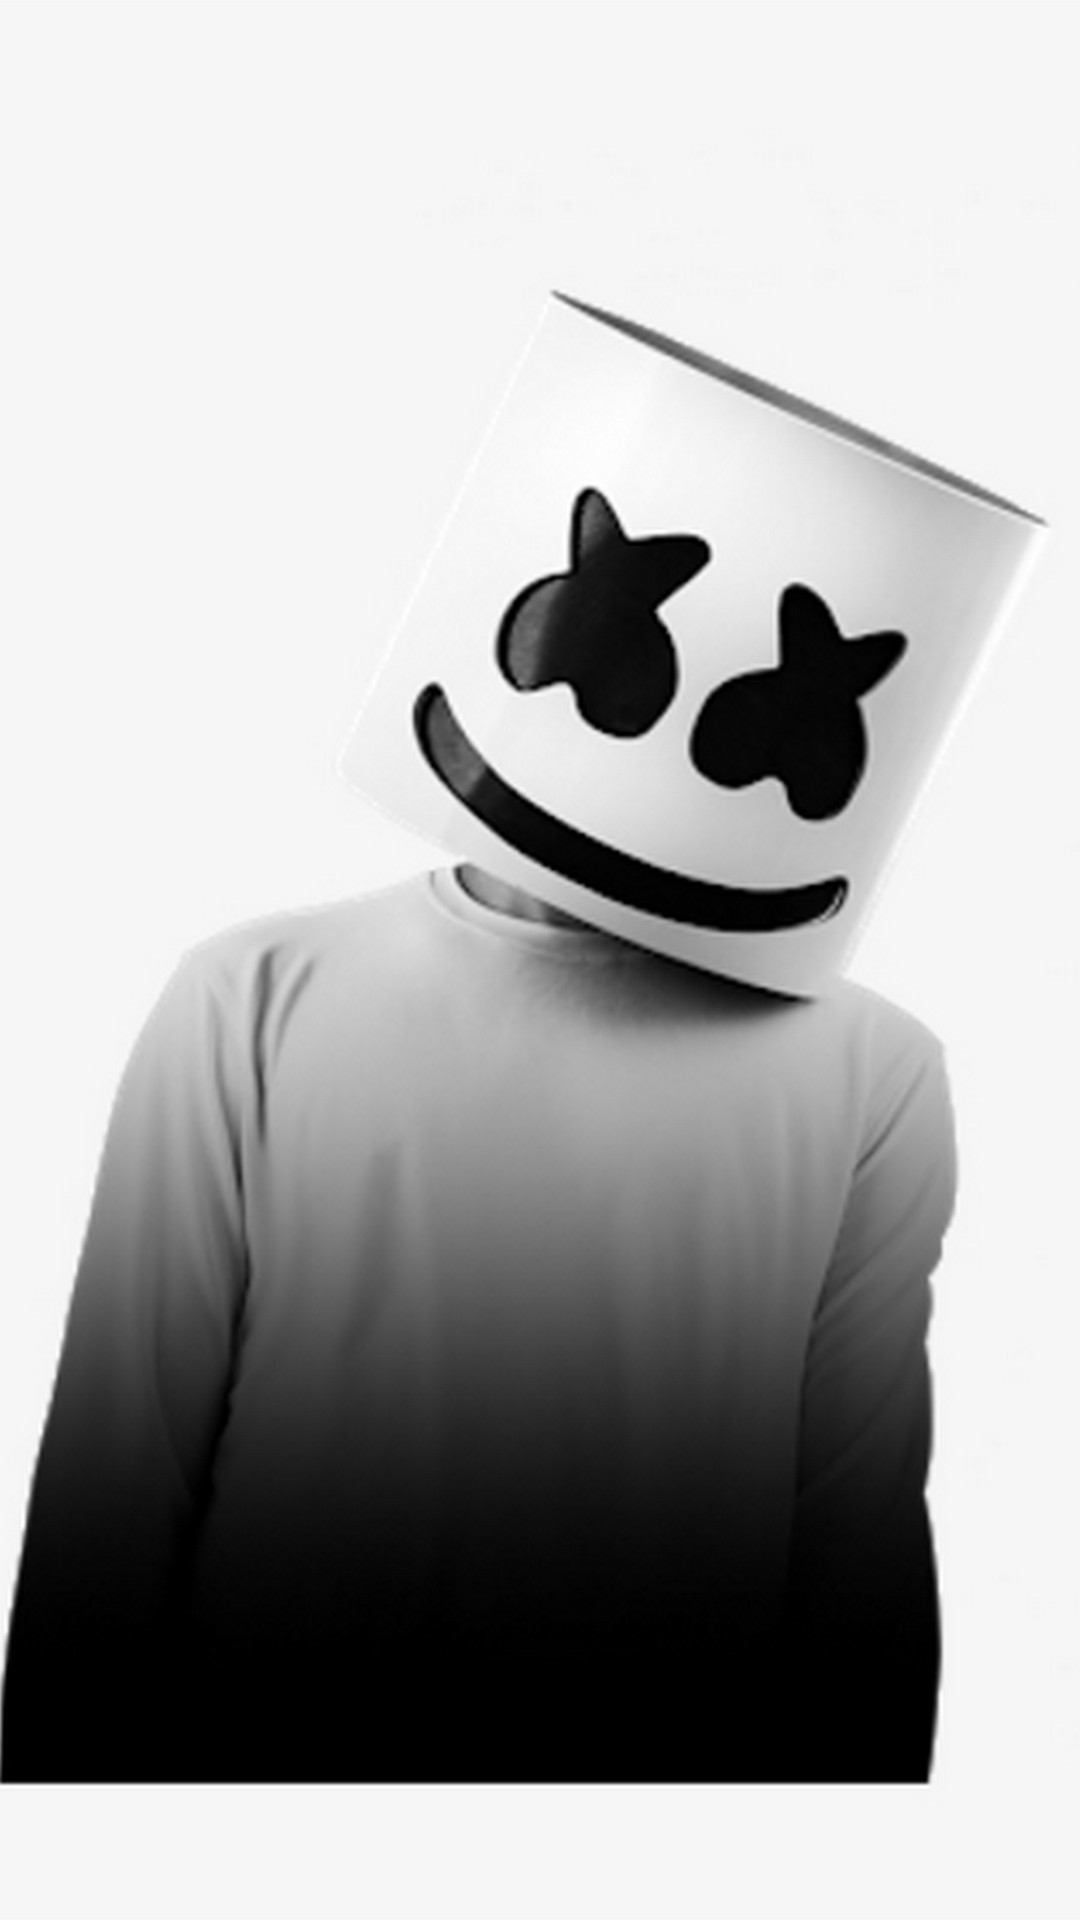 Marshmello iPhone 6 Wallpaper with high-resolution 1080x1920 pixel. You can use this wallpaper for your iPhone 5, 6, 7, 8, X, XS, XR backgrounds, Mobile Screensaver, or iPad Lock Screen